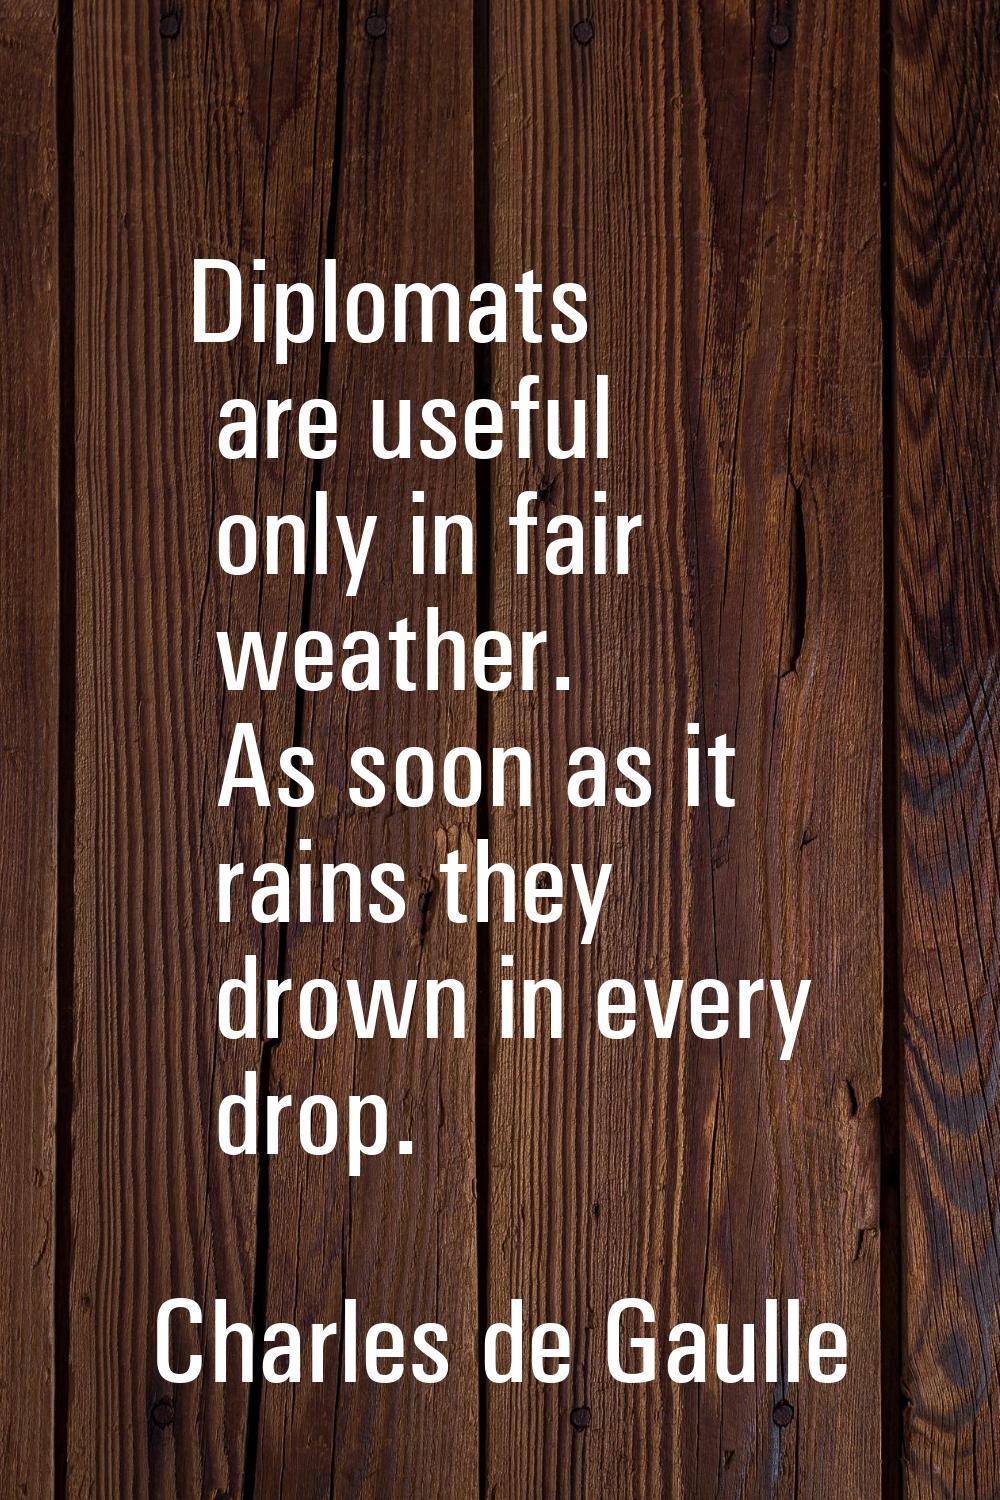 Diplomats are useful only in fair weather. As soon as it rains they drown in every drop.